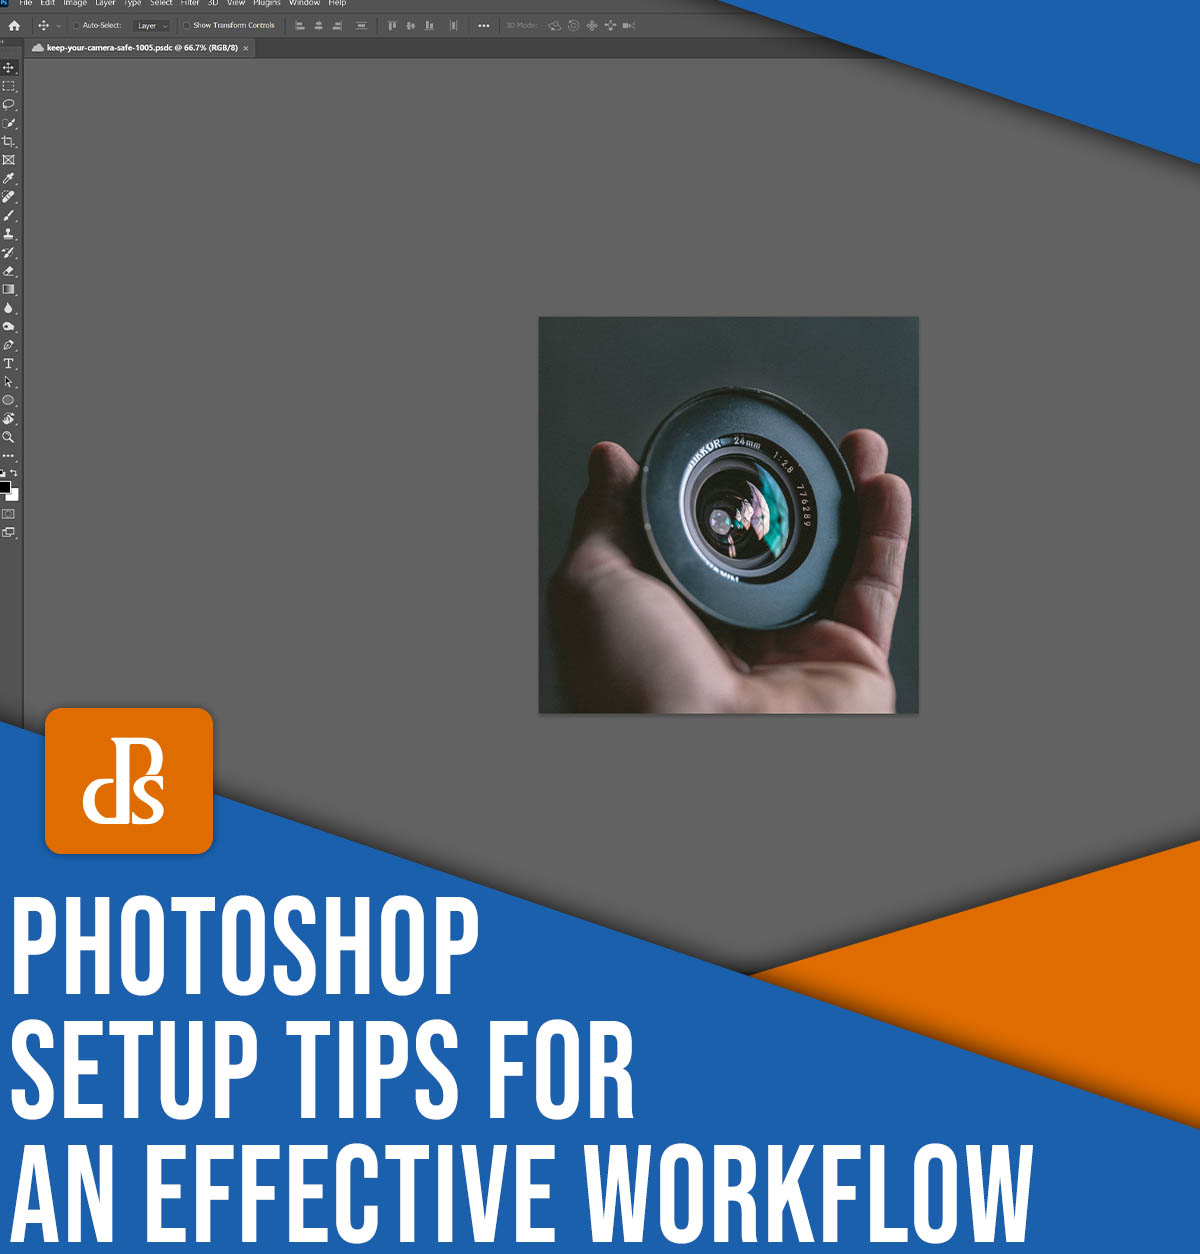 Photoshop setup tips for an effective workflow